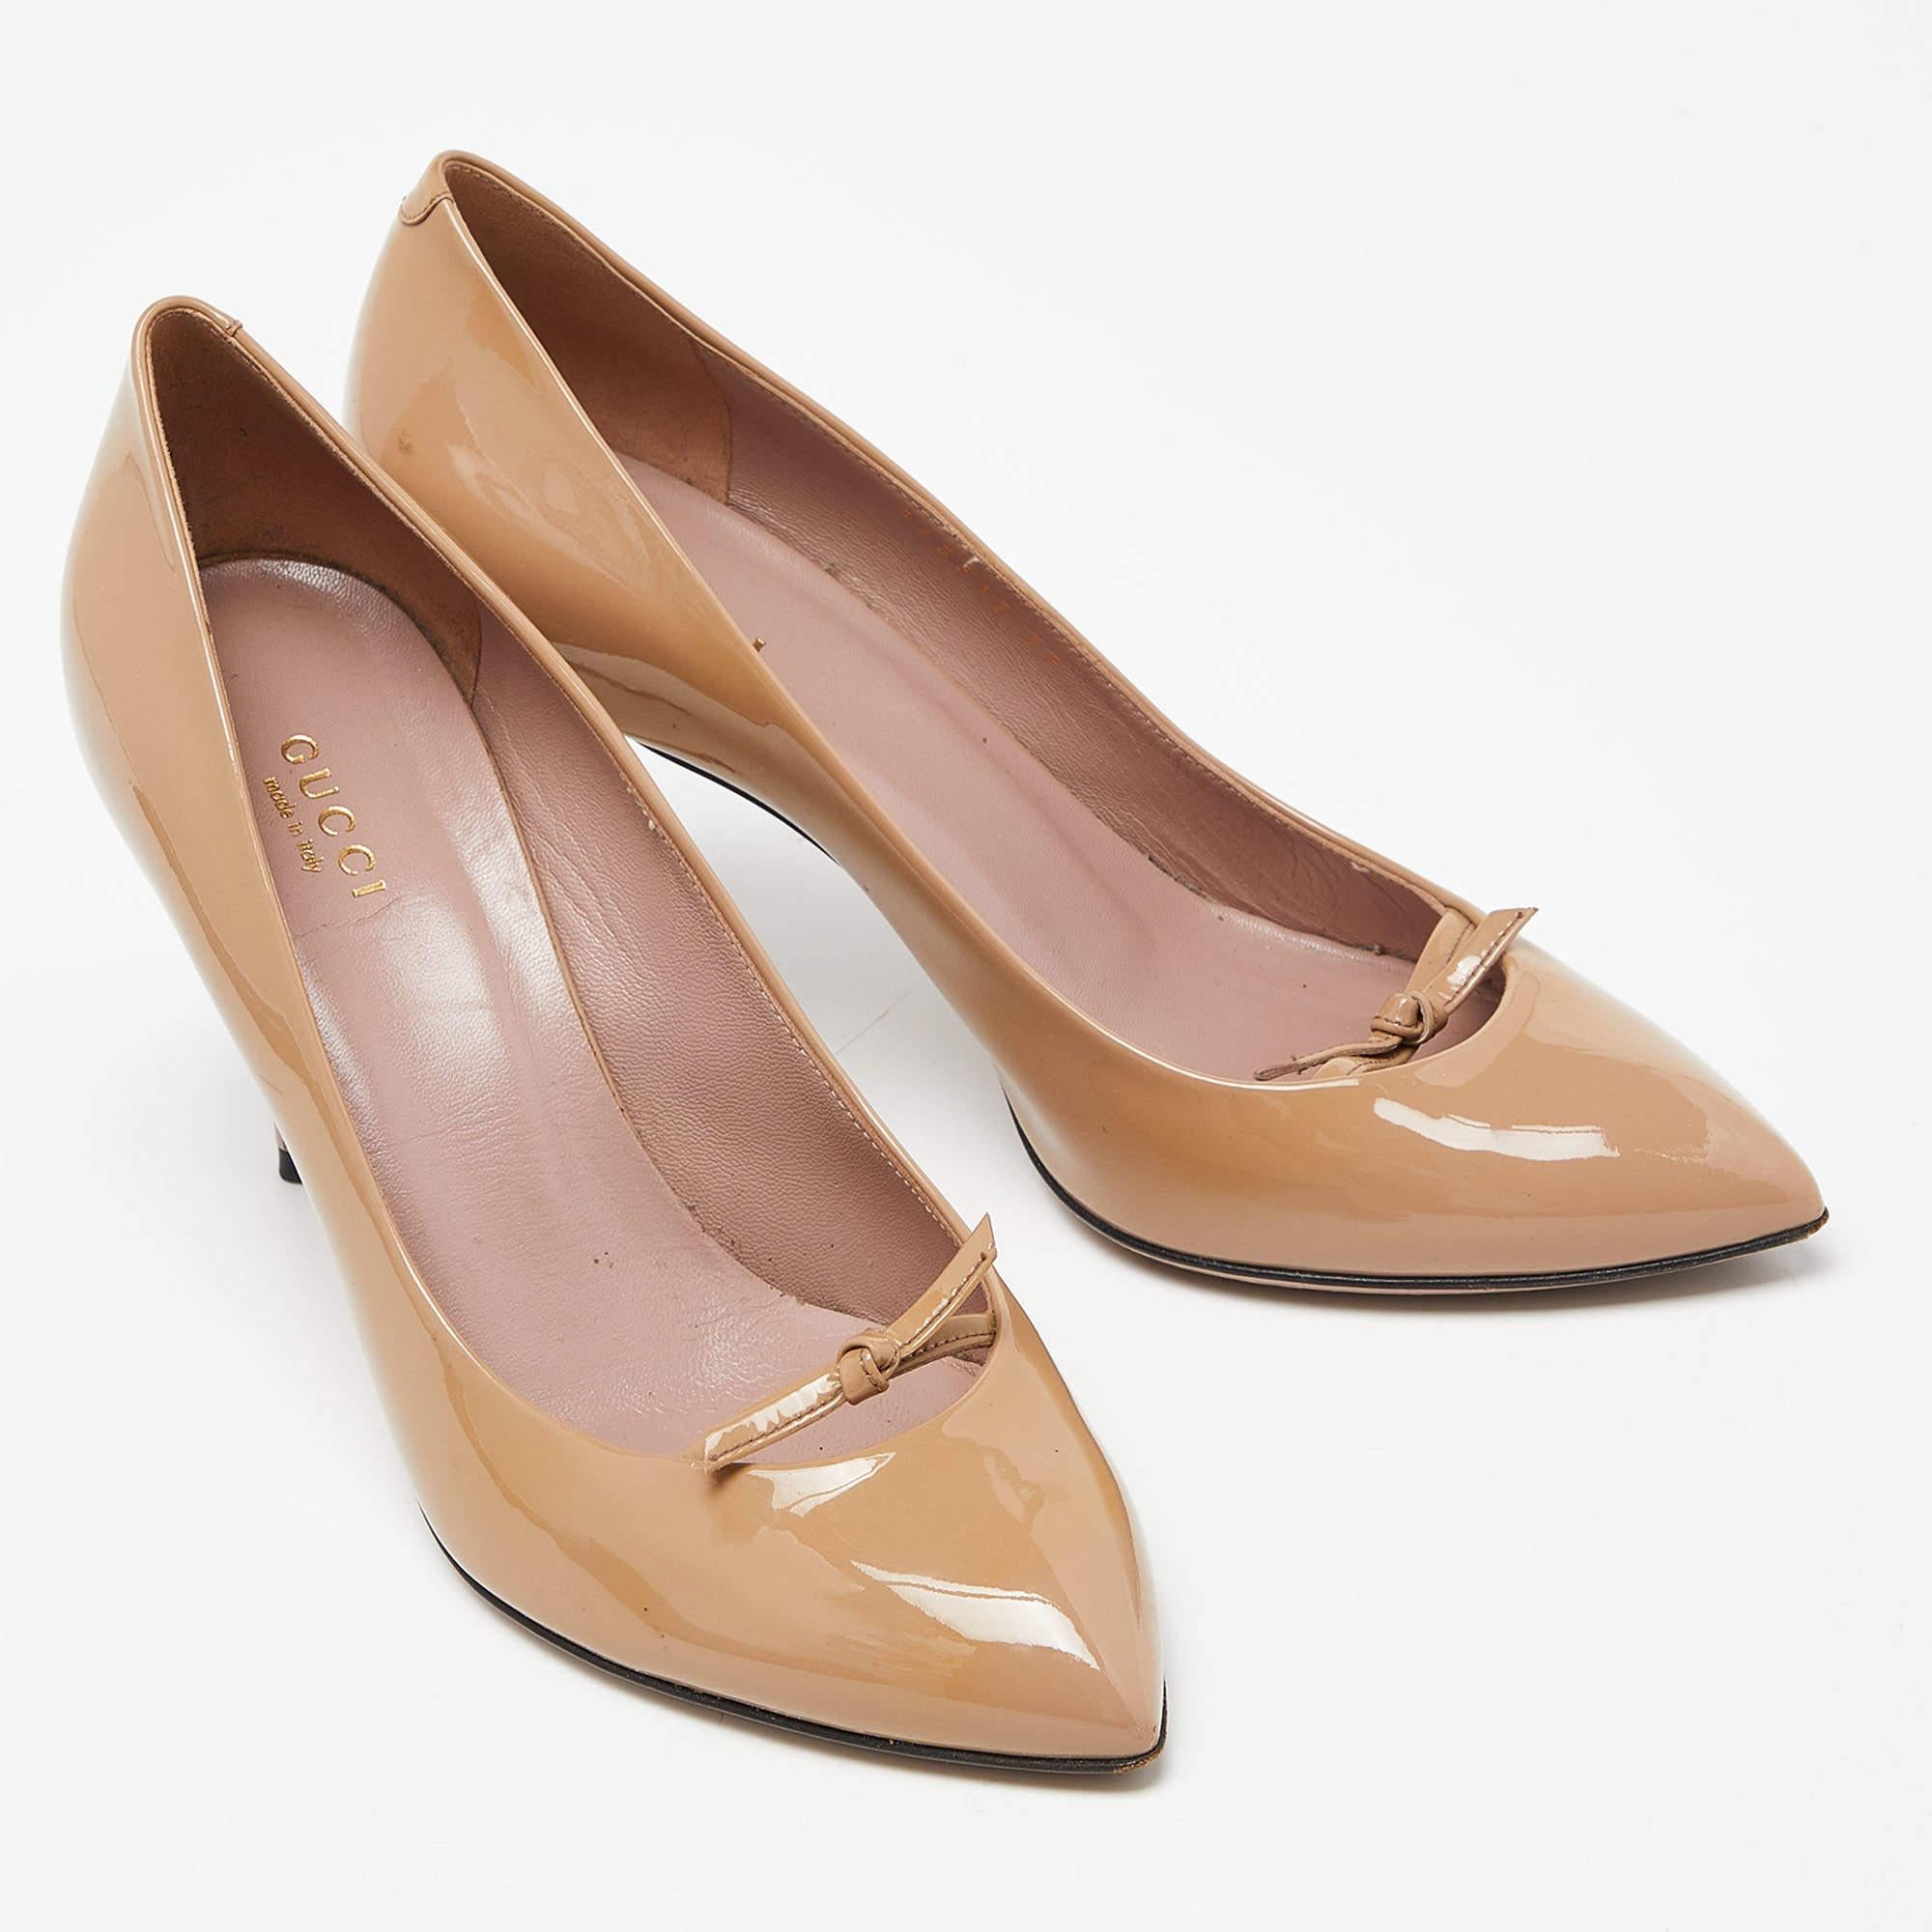 Gucci Beige Patent Leather Knotted Bow Detail Pumps Size 37 For Sale 1